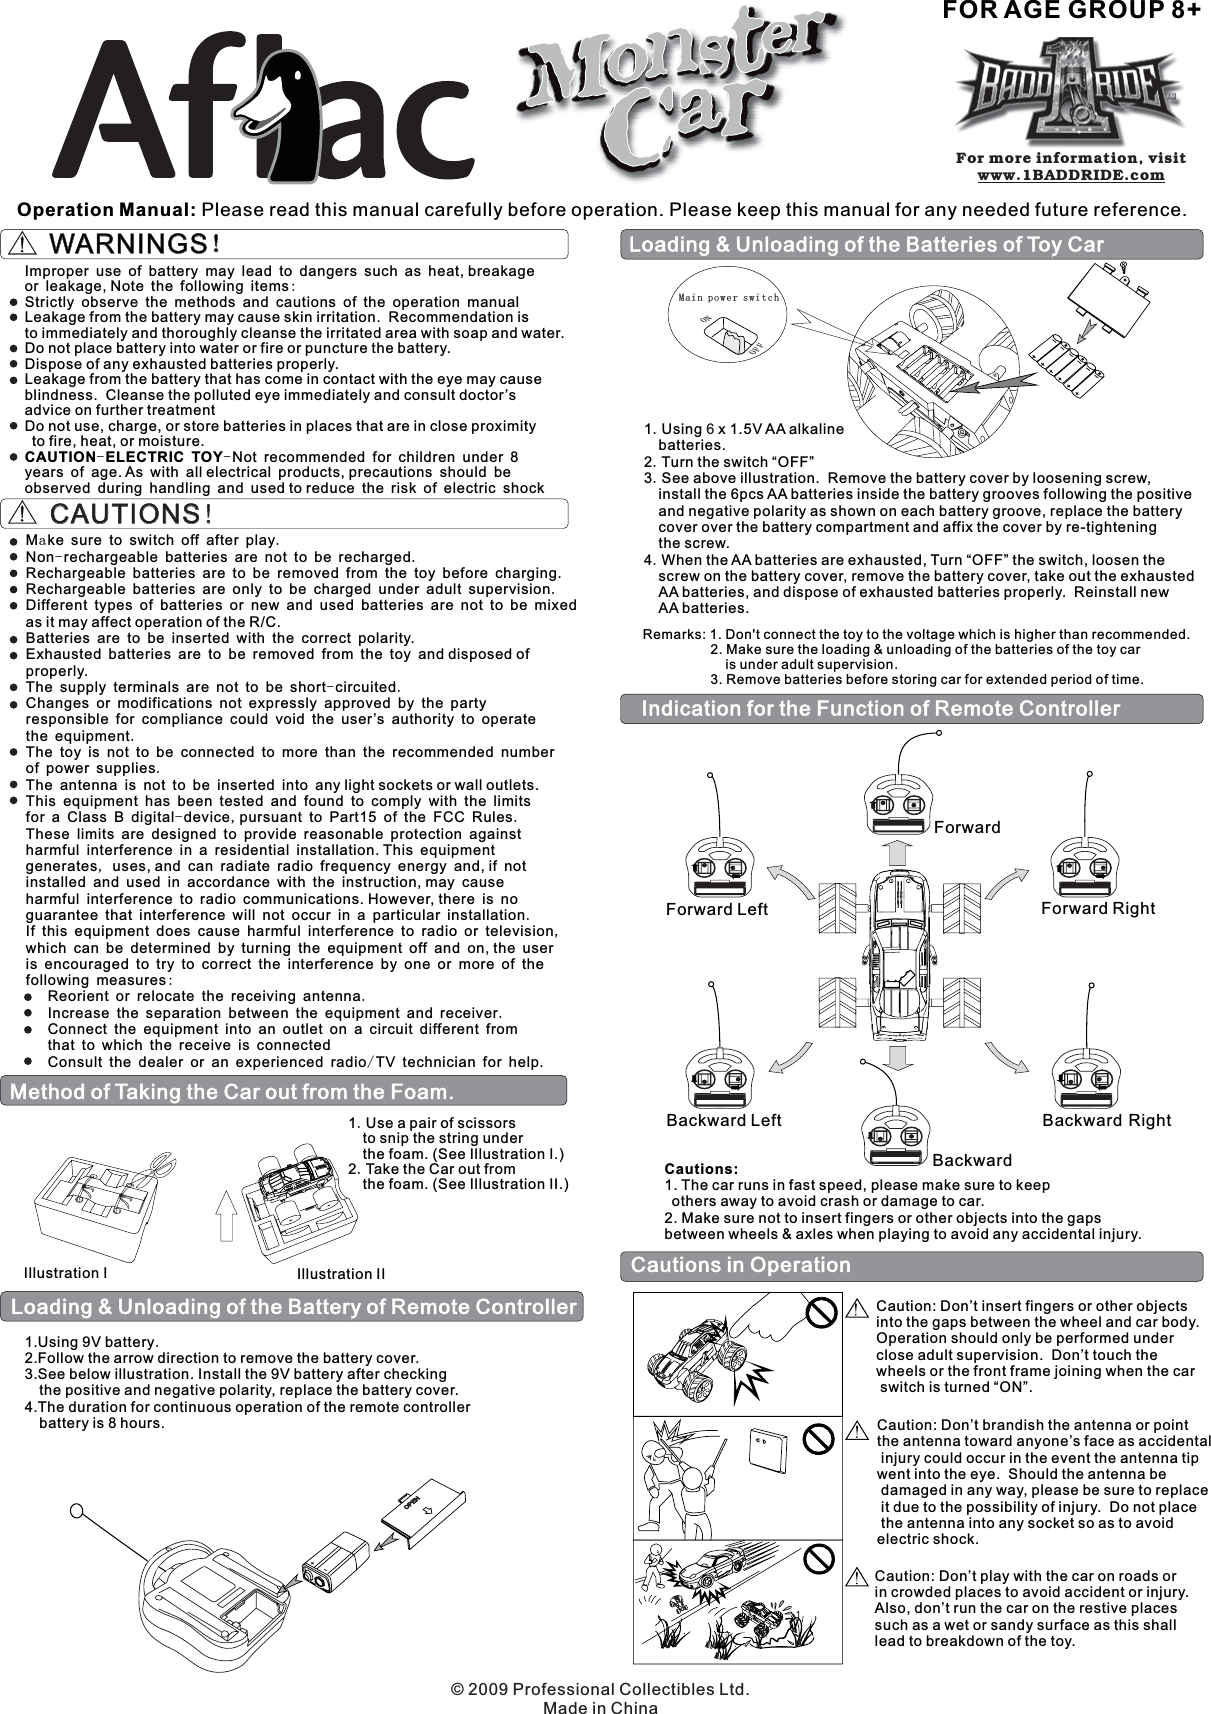 Operation Manual: Please read this manual carefully before operation. Please keep this manual for any needed future reference.FOR AGE GROUP 8+WARNINGS！WARNINGS！Improper use of battery may lead to dangers such as heat, breakageor leakage, Note the following itemsStrictly observe the methods and cautions of the operation manualLeakage from the battery may cause skin irritation.  Recommendation isto immediately and thoroughly cleanse the irritated area with soap and water.Do not place battery into water or fire or puncture the battery.Dispose of any exhausted batteries properly.Leakage from the battery that has come in contact with the eye may causeblindness.  Cleanse the polluted eye immediately and consult doctor’sadvice on further treatmentDo not use, charge, or store batteries in places that are in close proximityto fire, heat, or moisture.Not recommended for children under 8years of age. As with all electrical products, precautions should beobserved during handling and used to reduce the risk of electric shock:--CAUTION ELECTRIC TOYLoading &amp; Unloading of the Battery of Remote Controller1.Using 9V battery2.Follow the arrow direction to remove the battery cover.3.See below illustration. Install the 9V battery after checkingthe positive and negative polarity, replace the battery cover.4.The duration for continuous operation of the remote controllerbattery is 8 hours..Method of Taking the Car out from the Foam.Illustration I Illustration II1 Use a pair of scissorsto snip the string underthe foam. (See Illustration I.)2 Take the Car out fromthe foam. (See Illustration II.)..CAUTIONS!CAUTIONS!a.-..-...-, .,.,:../M ke sure to switch off after playNon rechargeable batteries are not to be rechargedRechargeable batteries are to be removed from the toy before charging.Rechargeable batteries are only to be charged under adult supervisionDifferent types of batteries or new and used batteries are not to be mixedas it may affect operation of the R/C.Batteries are to be inserted with the correct polarity.Exhausted batteries are to be removed from the toy and disposed ofproperly.The supply terminals are not to be short circuitedChanges or modifications not expressly approved by the partyresponsible for compliance could void the user’s authority to operatethe equipmentThe toy is not to be connected to more than the recommended numberof power suppliesThe antenna is not to be inserted into any light sockets or wall outlets.This equipment has been tested and found to comply with the limitsfor a Class B digital device pursuant to Part15 of the FCC RulesThese limits are designed to provide reasonable protection againstharmful interference in a residential installation. This equipmentgenerates uses, and can radiate radio frequency energy and, if notinstalled and used in accordance with the instruction, may causeharmful interference to radio communications. However, there is noguarantee that interference will not occur in a particular installationIf this equipment does cause harmful interference to radio or televisionwhich can be determined by turning the equipment off and on, the useris encouraged to try to correct the interference by one or more of thefollowing measuresReorient or relocate the receiving antennaIncrease the separation between the equipment and receiverConnect the equipment into an outlet on a circuit different fromthat to which the receive is connectedConsult the dealer or an experienced radio TV technician for help.Main power switchONOFFLoading &amp; Unloading of the Batteries of Toy Car1 Using x 1.5V AA alkalinebatteries.23 See above illustration.  Remove the battery cover by loosening screw,install the 6pcs AA batteries inside the battery grooves following the positiveand negative polarity as shown on each battery groove, replace the batterycover over the battery compartment and affix the cover by re-tighteningthe screw.4 When the AA batteries are exhausted, Turn “OFF” the switch, loosen thescrew on the battery cover, remove the battery cover, take out the exhaustedAA batteries, and dispose of exhausted batteries properly.  Reinstall newAA batteries.....Turn the switch “OFF”6Remarks: 1. Don&apos;t connect the toy to the voltage which is higher than recommended.2. Make sure the loading &amp; unloading of the batteries of the toy caris under adult supervision.3. Remove batteries before storing car for extended period of time.Cautions in OperationCaution: Don’t insert fingers or other objectsinto the gaps between the wheel and car body.Operation should only be performed underclose adult supervision.  Don’t touch thewheels or the front frame joining when the carswitch is turned “ON”.Caution: Don’t brandish the antenna or pointthe antenna toward anyone’s face as accidentalinjury could occur in the event the antenna tipwent into the eye.  Should the antenna bedamaged in any way, please be sure to replaceit due to the possibility of injury.  Do not placethe antenna into any socket so as to avoidelectric shock.Caution: Don’t play with the car on roads orin crowded places to avoid accident or injury.Also, don’t run the car on the restive placessuch as a wet or sandy surface as this shalllead to breakdown of the toy.Indication for the Function of Remote ControllerForwardForward LeftBackward Left Backward RightForward RightBackwardCautions:1. The car runs in fast speed, please make sure to keepothers away to avoid crash or damage to car.2. Make sure not to insert fingers or other objects into the gapsbetween wheels &amp; axles when playing to avoid any accidental injury.For more information, visitwww.1BADDRIDE.com© 2009 Professional Collectibles Ltd.Made in China